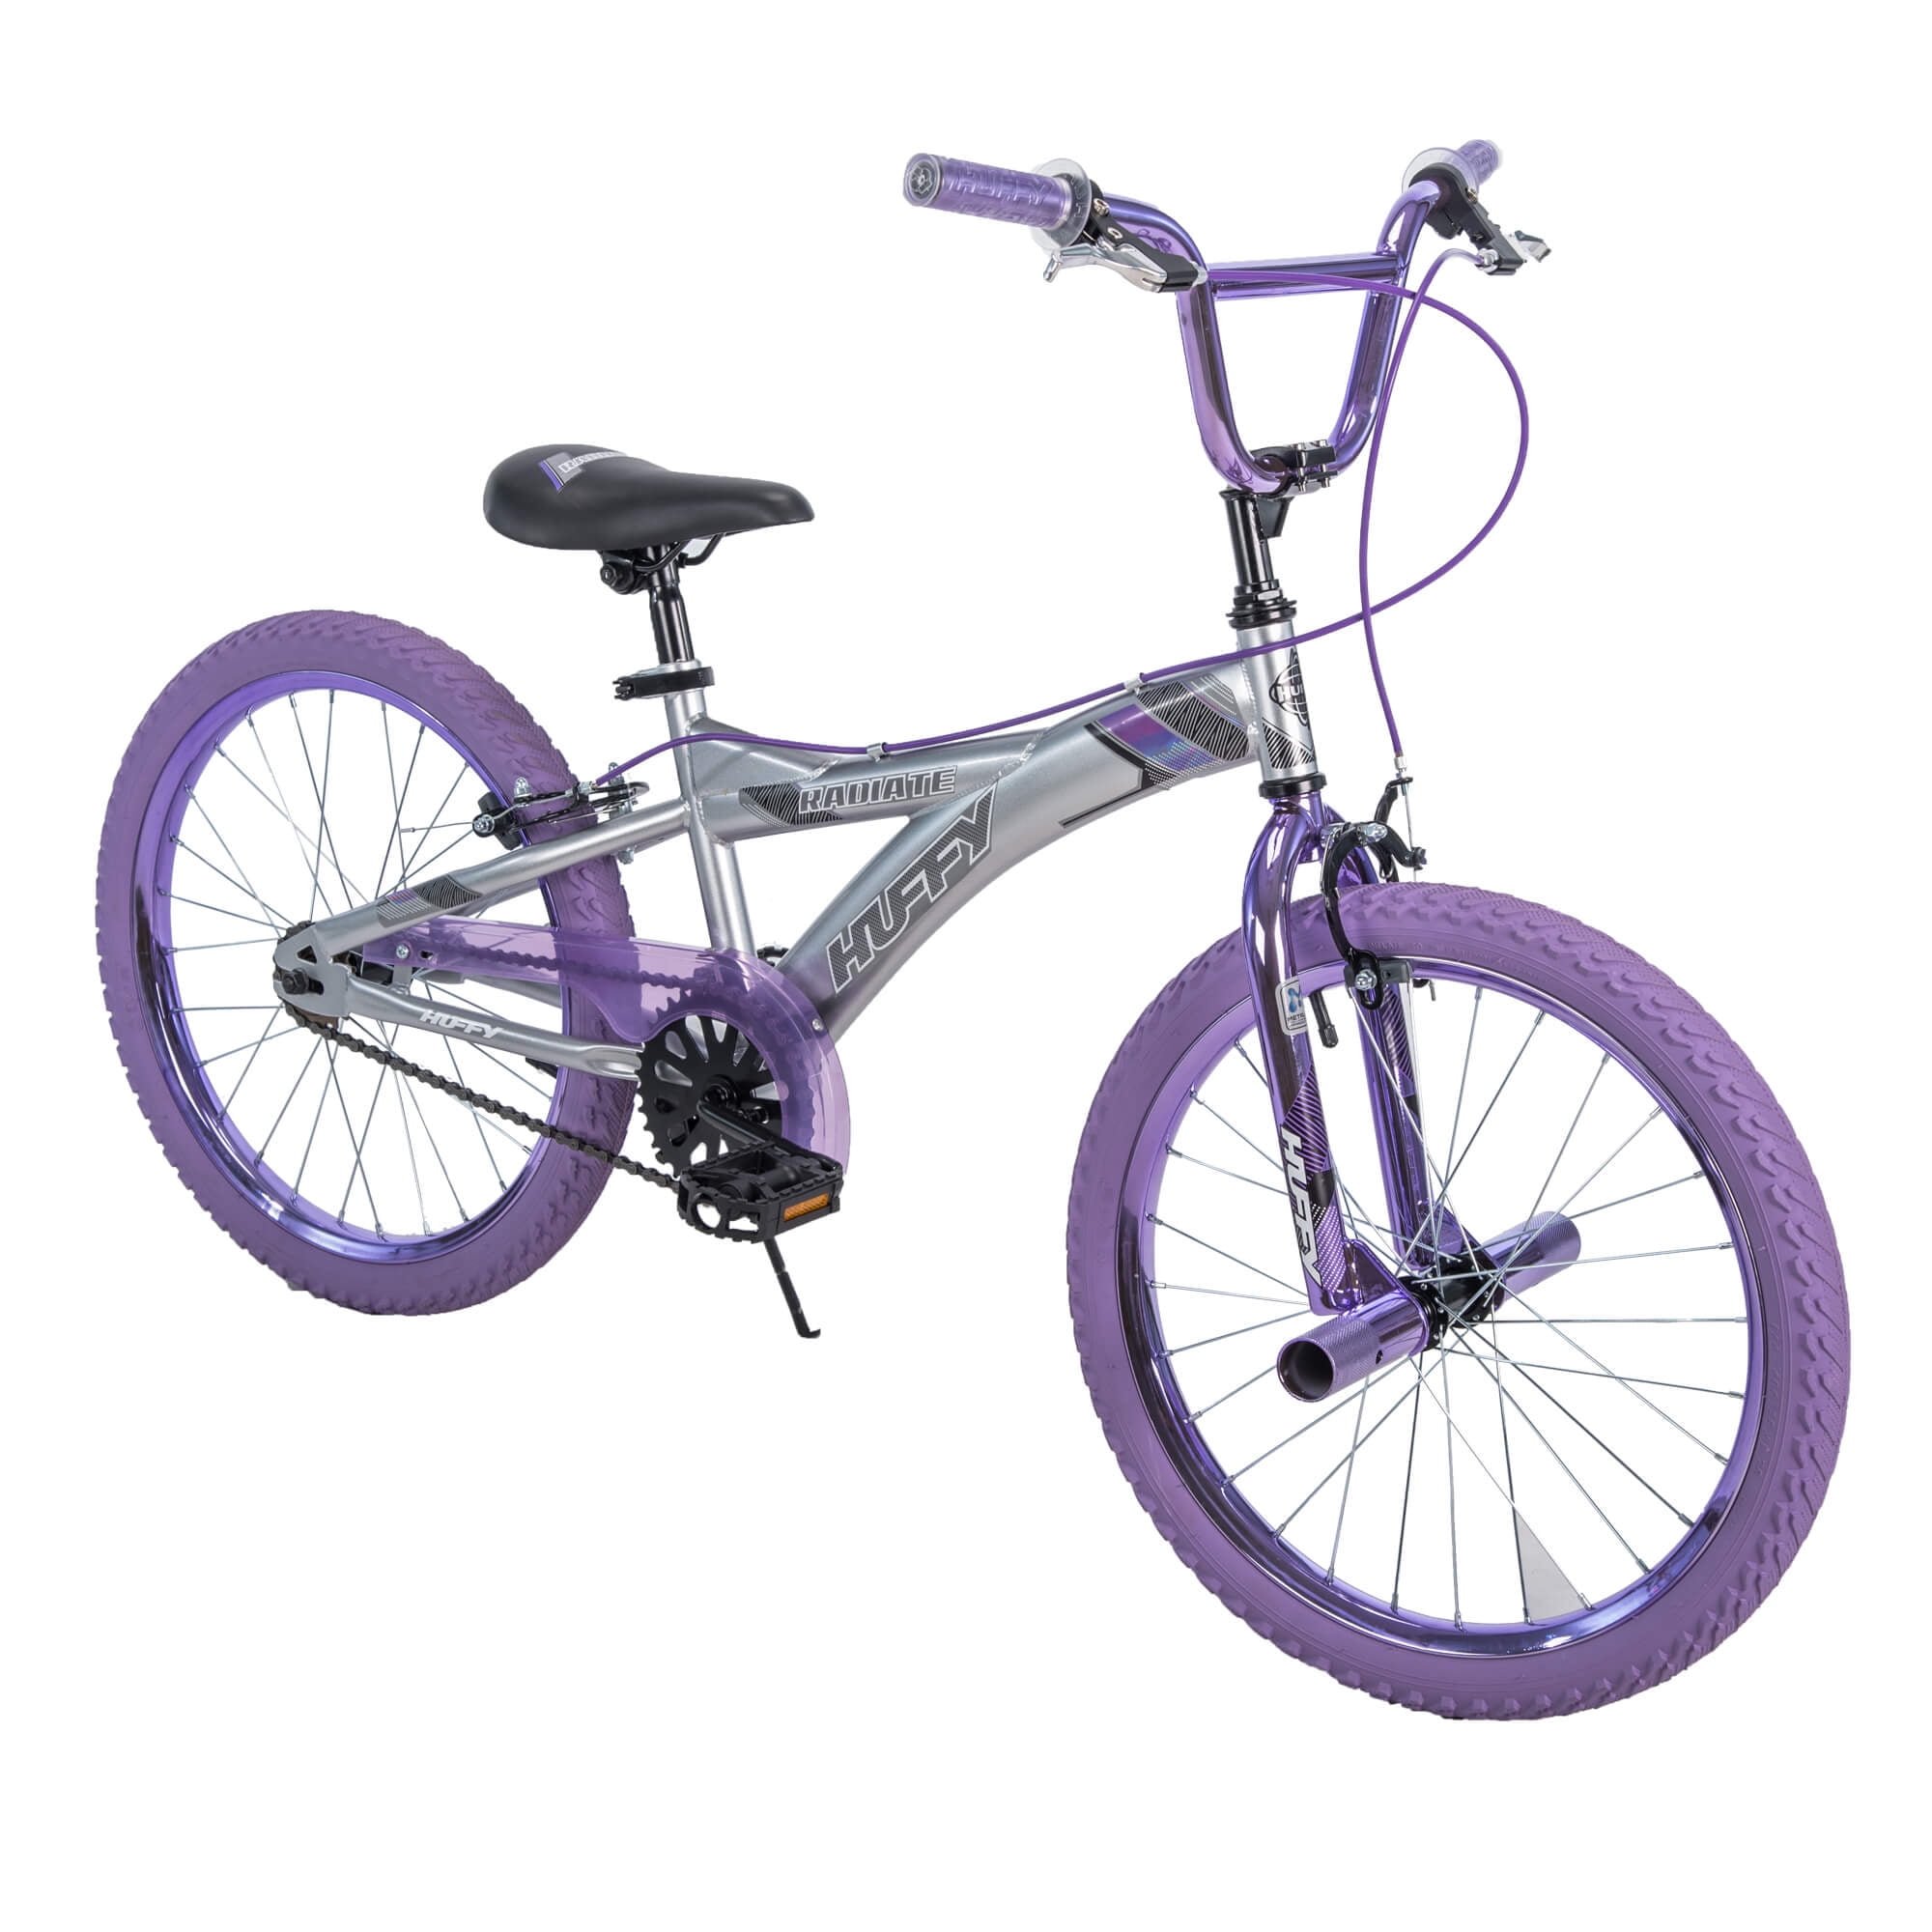 Blue/Pink 50539 for sale online Huffy Sea Star 20" Bike for Girls 